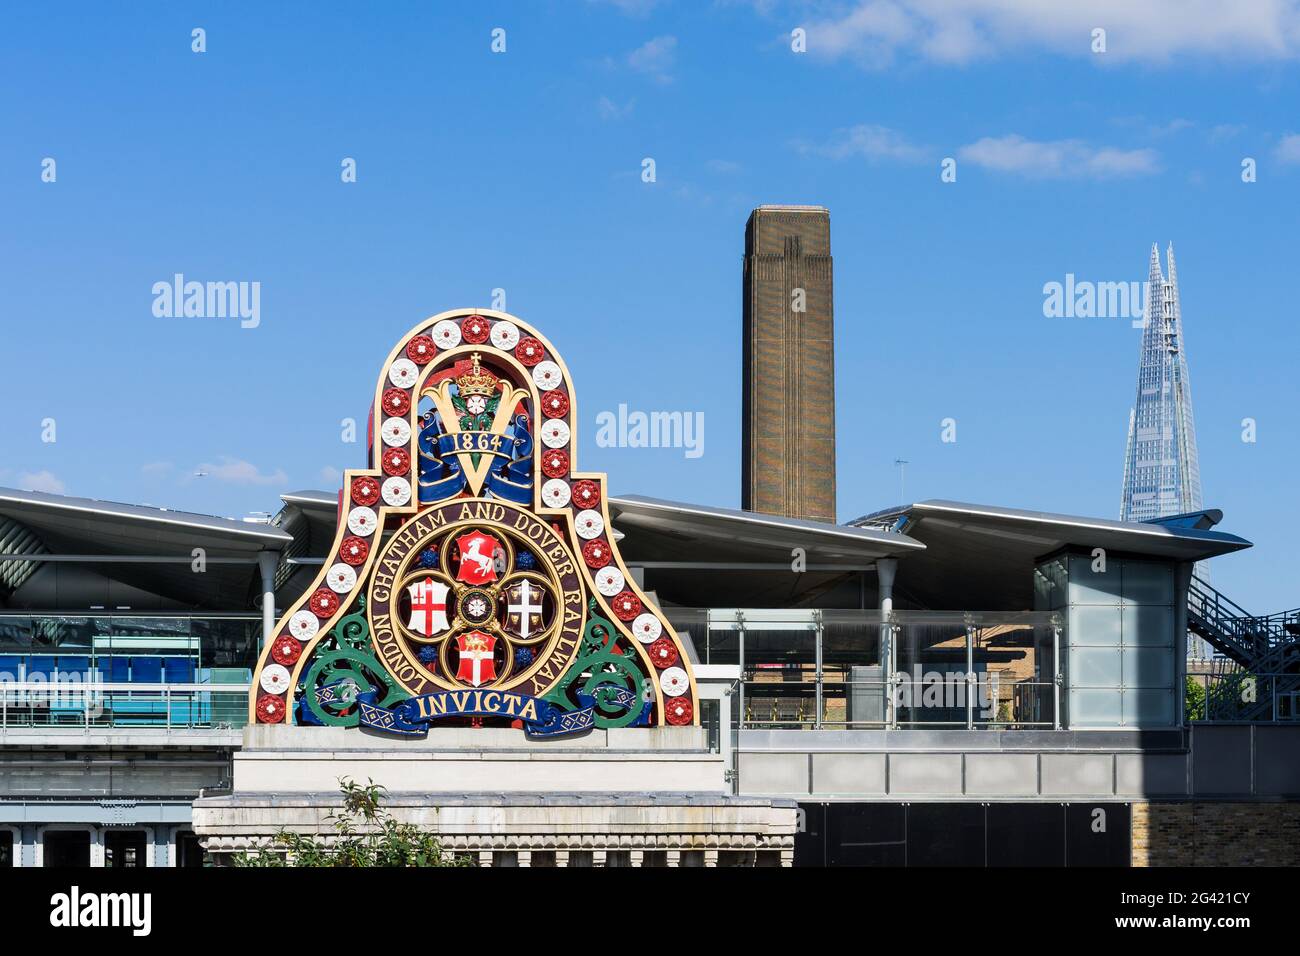 Modern buildings and an old railway company sign on the Southbank in London Stock Photo